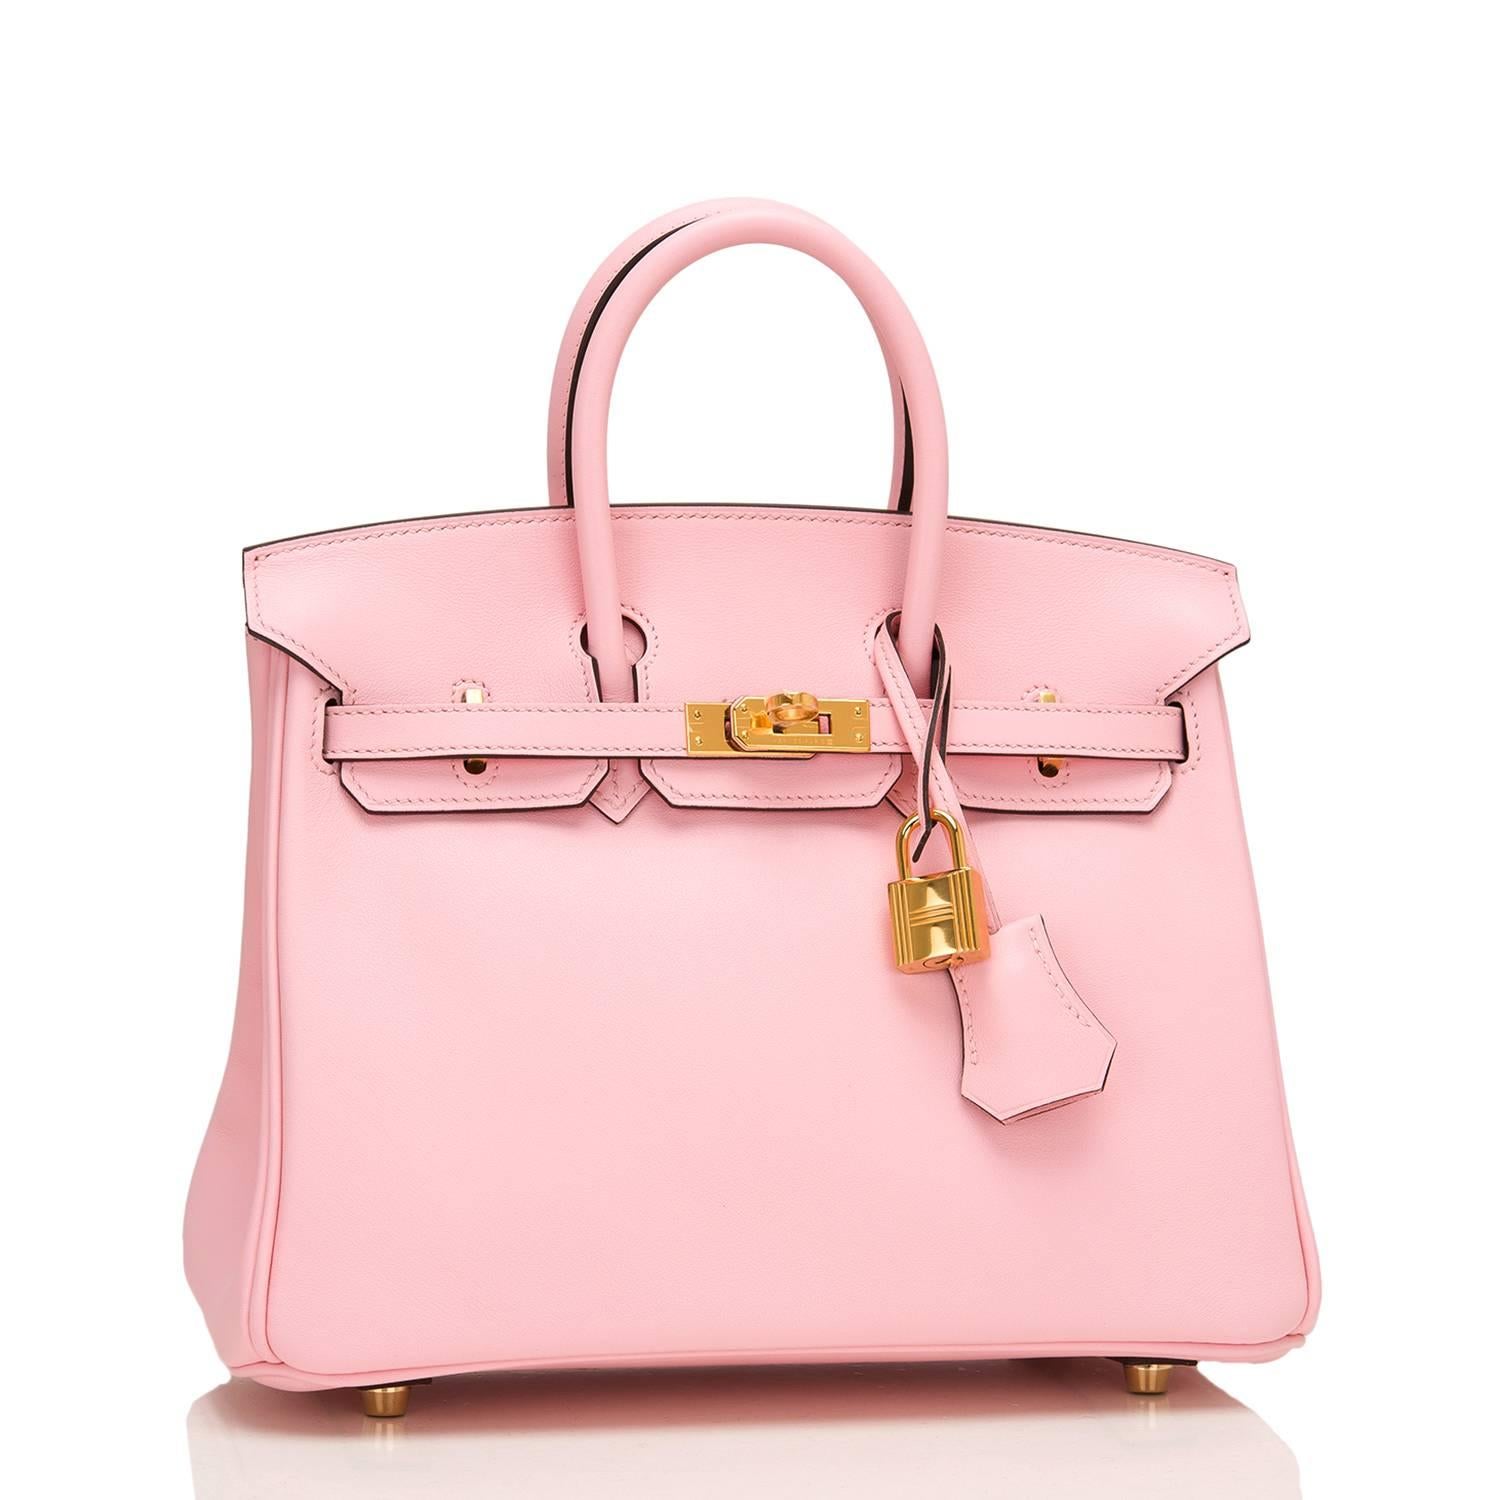 Hermes Rose Sakura Birkin 25cm of swift leather with gold hardware.

This Birkin has tonal stitching, a front toggle closure, a clochette with lock and two keys, and double rolled handles.

The interior is lined with Rose Sakura chevre and has one